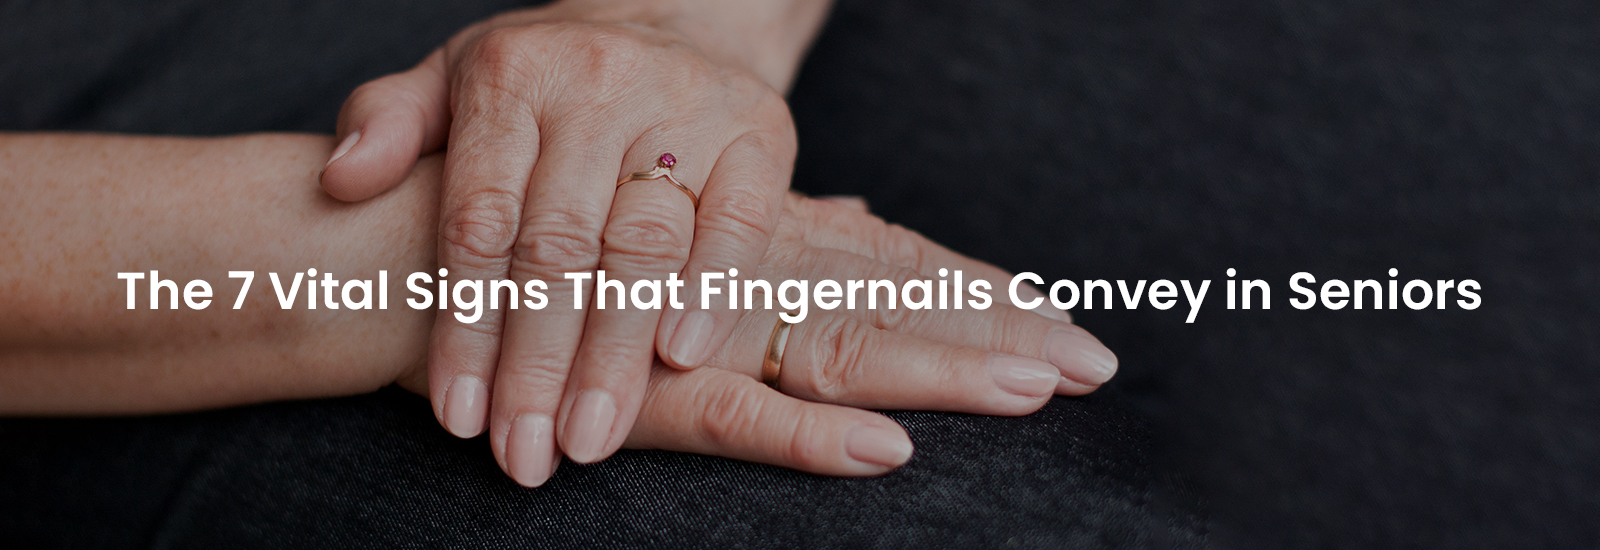 6 Common Nail Abnormalities and How to Treat Them - DMSI